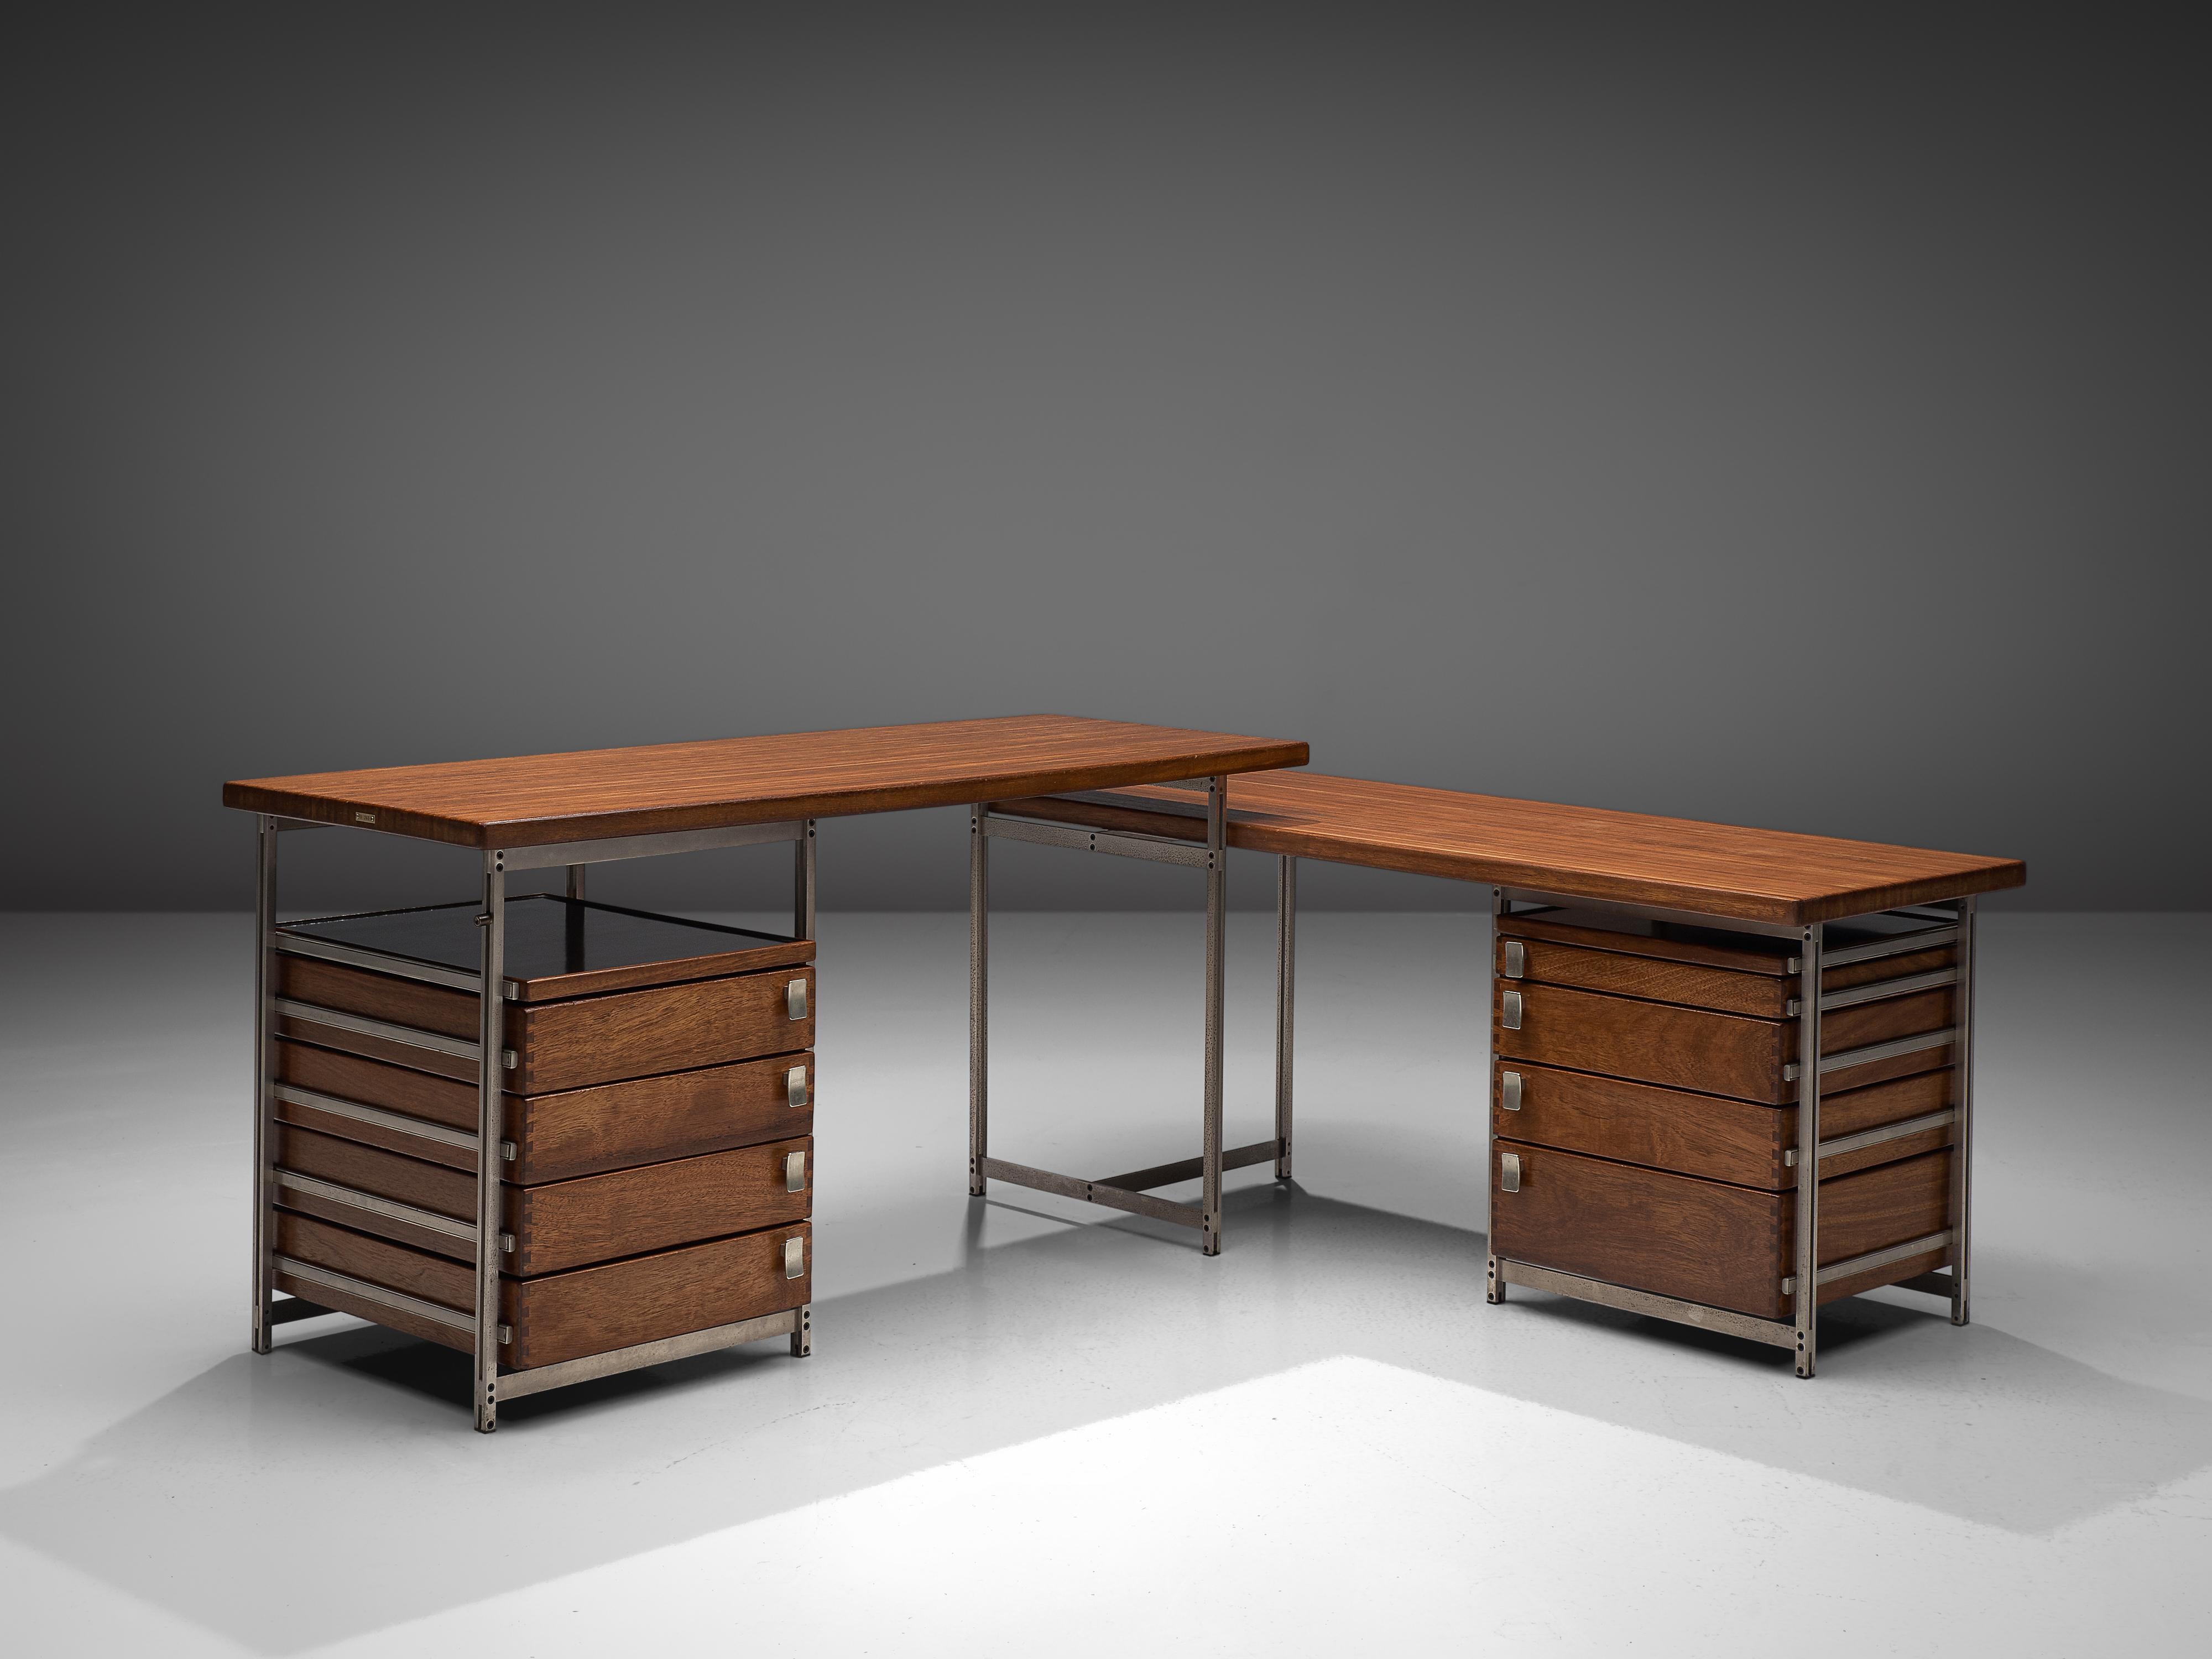 Jules Wabbes, corner writing desk, mutenyé, nickel-plated metal, aluminum, Belgium, 1957

Beautifully designed desk by one of Belgium's most renowned designers Jules Wabbes. This piece is made for the Foncolin building, one of Wabbes first large